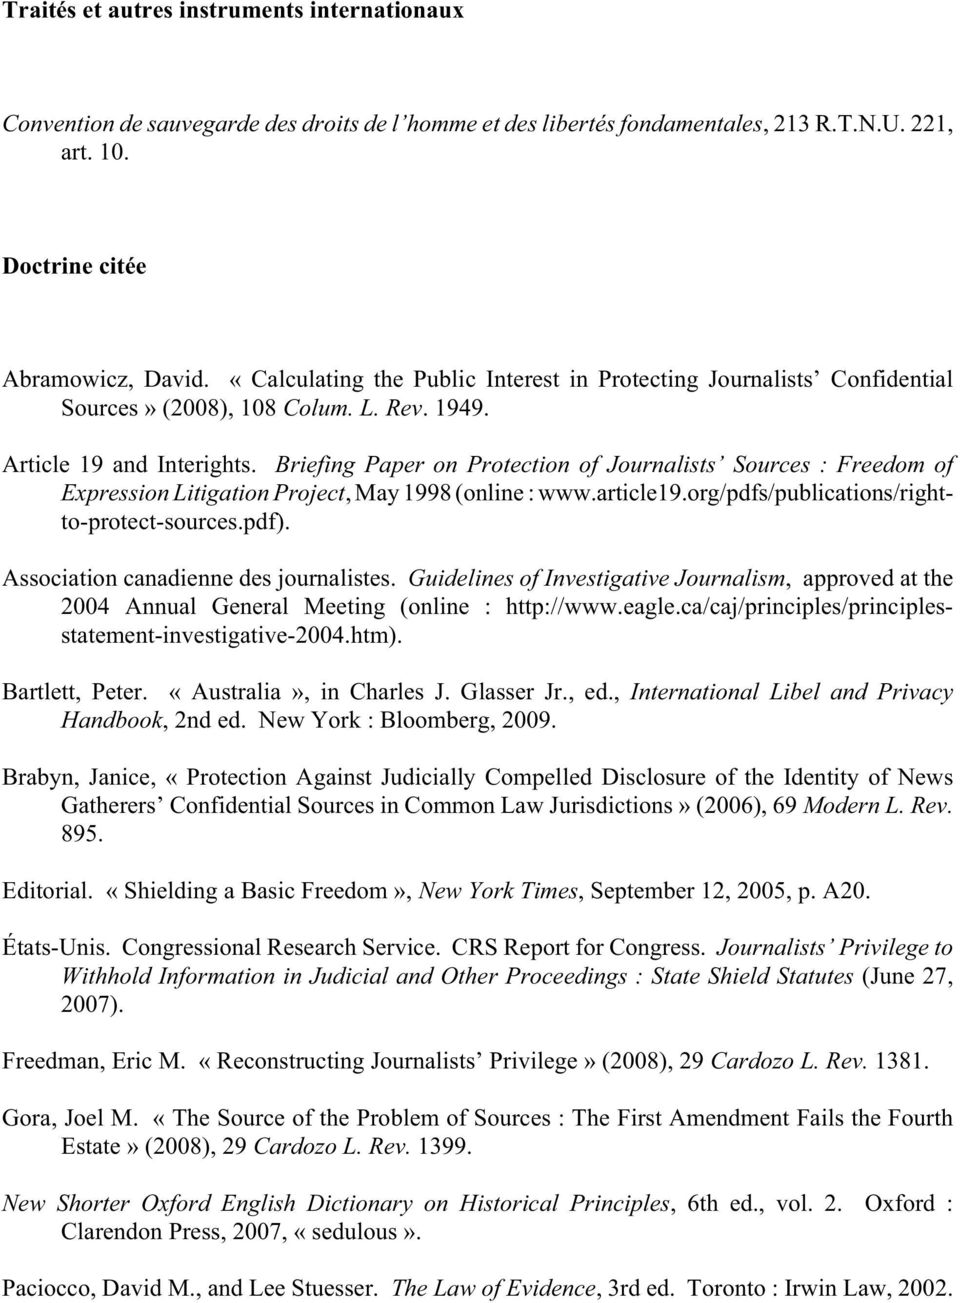 Briefing Paper on Protection of Journalists Sources : Freedom of Expression Litigation Project, May 1998 (online : www.article19.org/pdfs/publications/rightto-protect-sources.pdf).